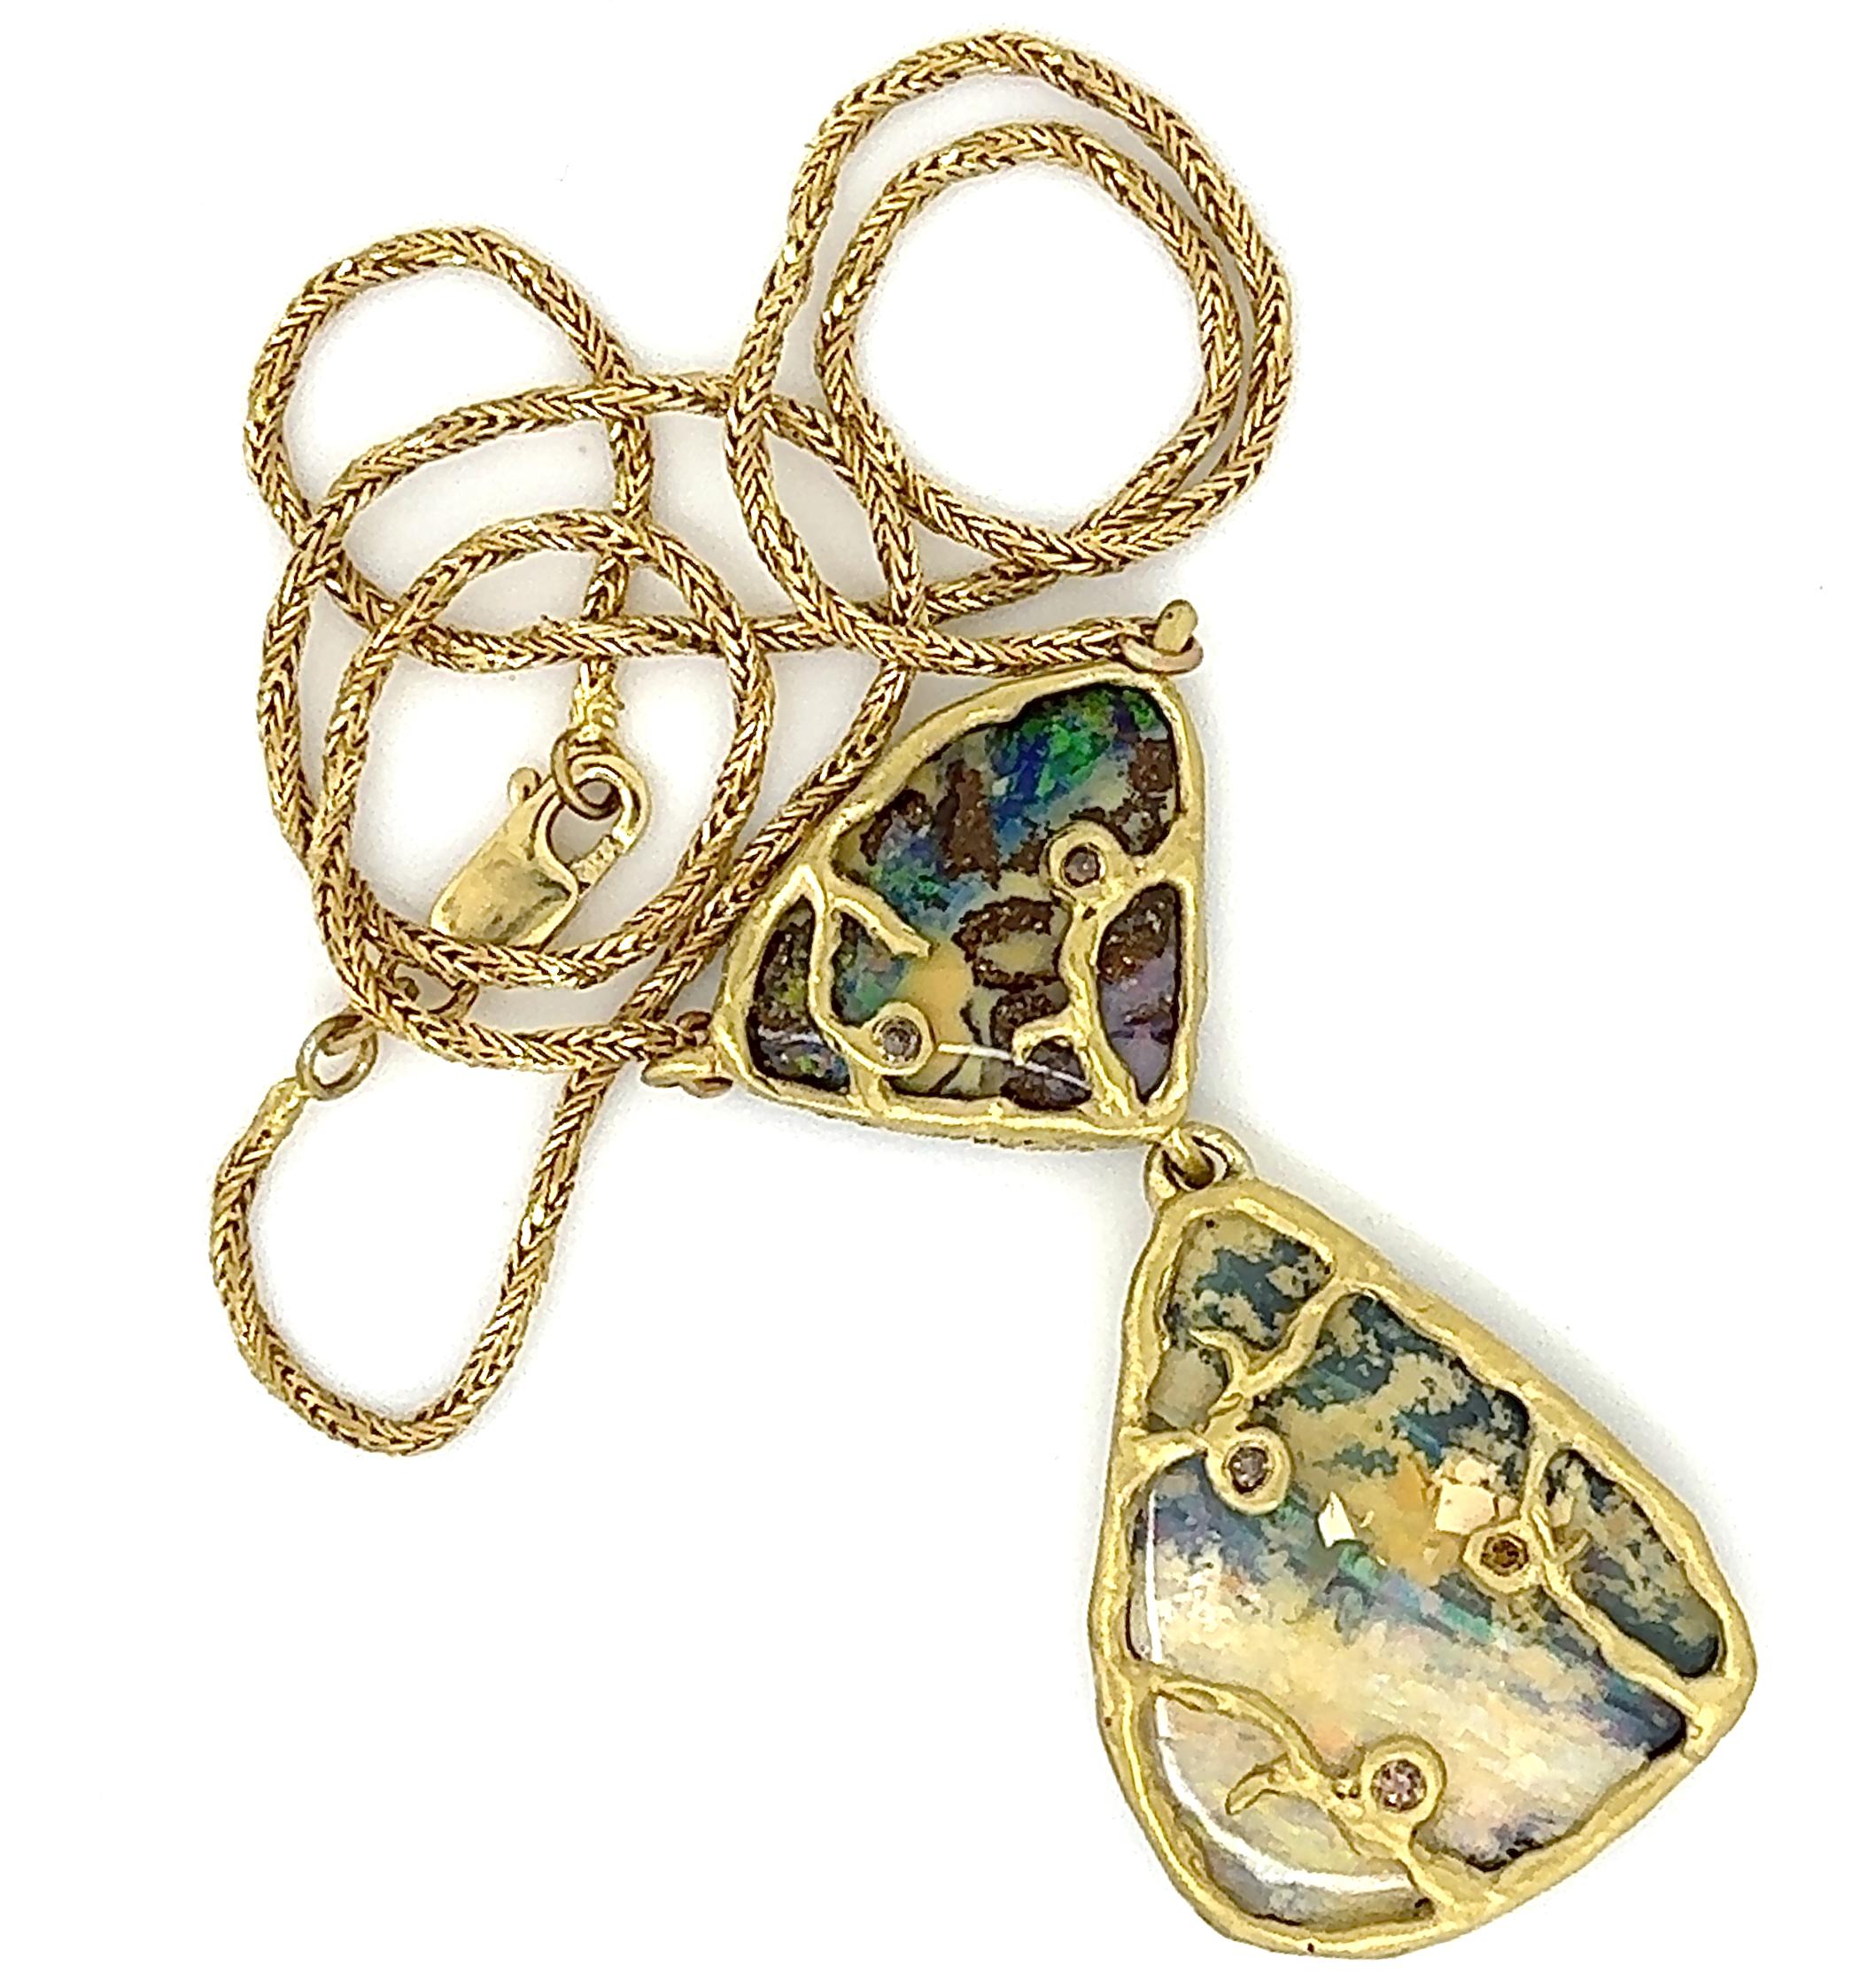 This one-of-a-kind showstopper by Eytan Brandes features two gorgeous and lively Australian boulder opals framed in gold and accented with natural brown diamonds.

The opals are from our good friends at Broken River Mining.  Their Yaraka mine, named